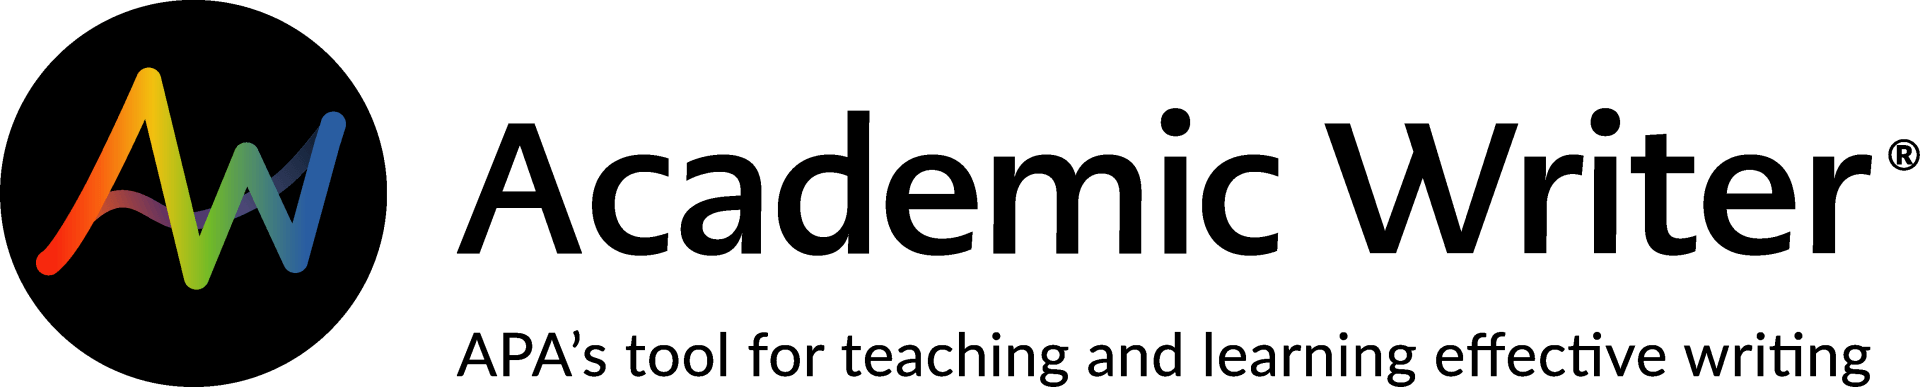 Academic Writer®: APA's tool for teaching and learning effective writing